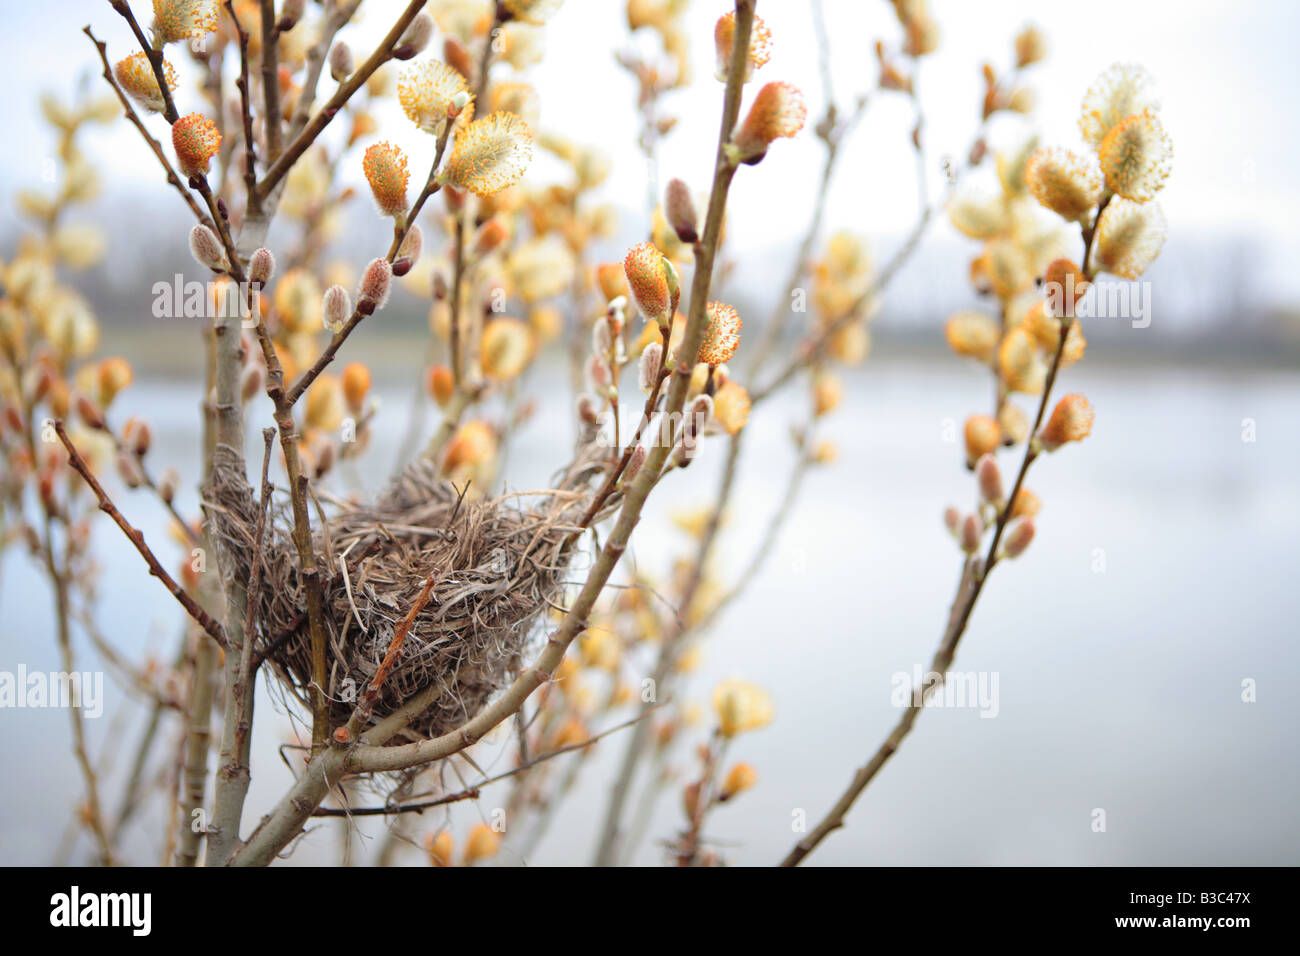 BIRD S NEST AND FLOWERING WILLOW SALIX BICOLOR BRANCHES IN EARLY SPRING IN NORTHERN ILLINOIS USA Stock Photo